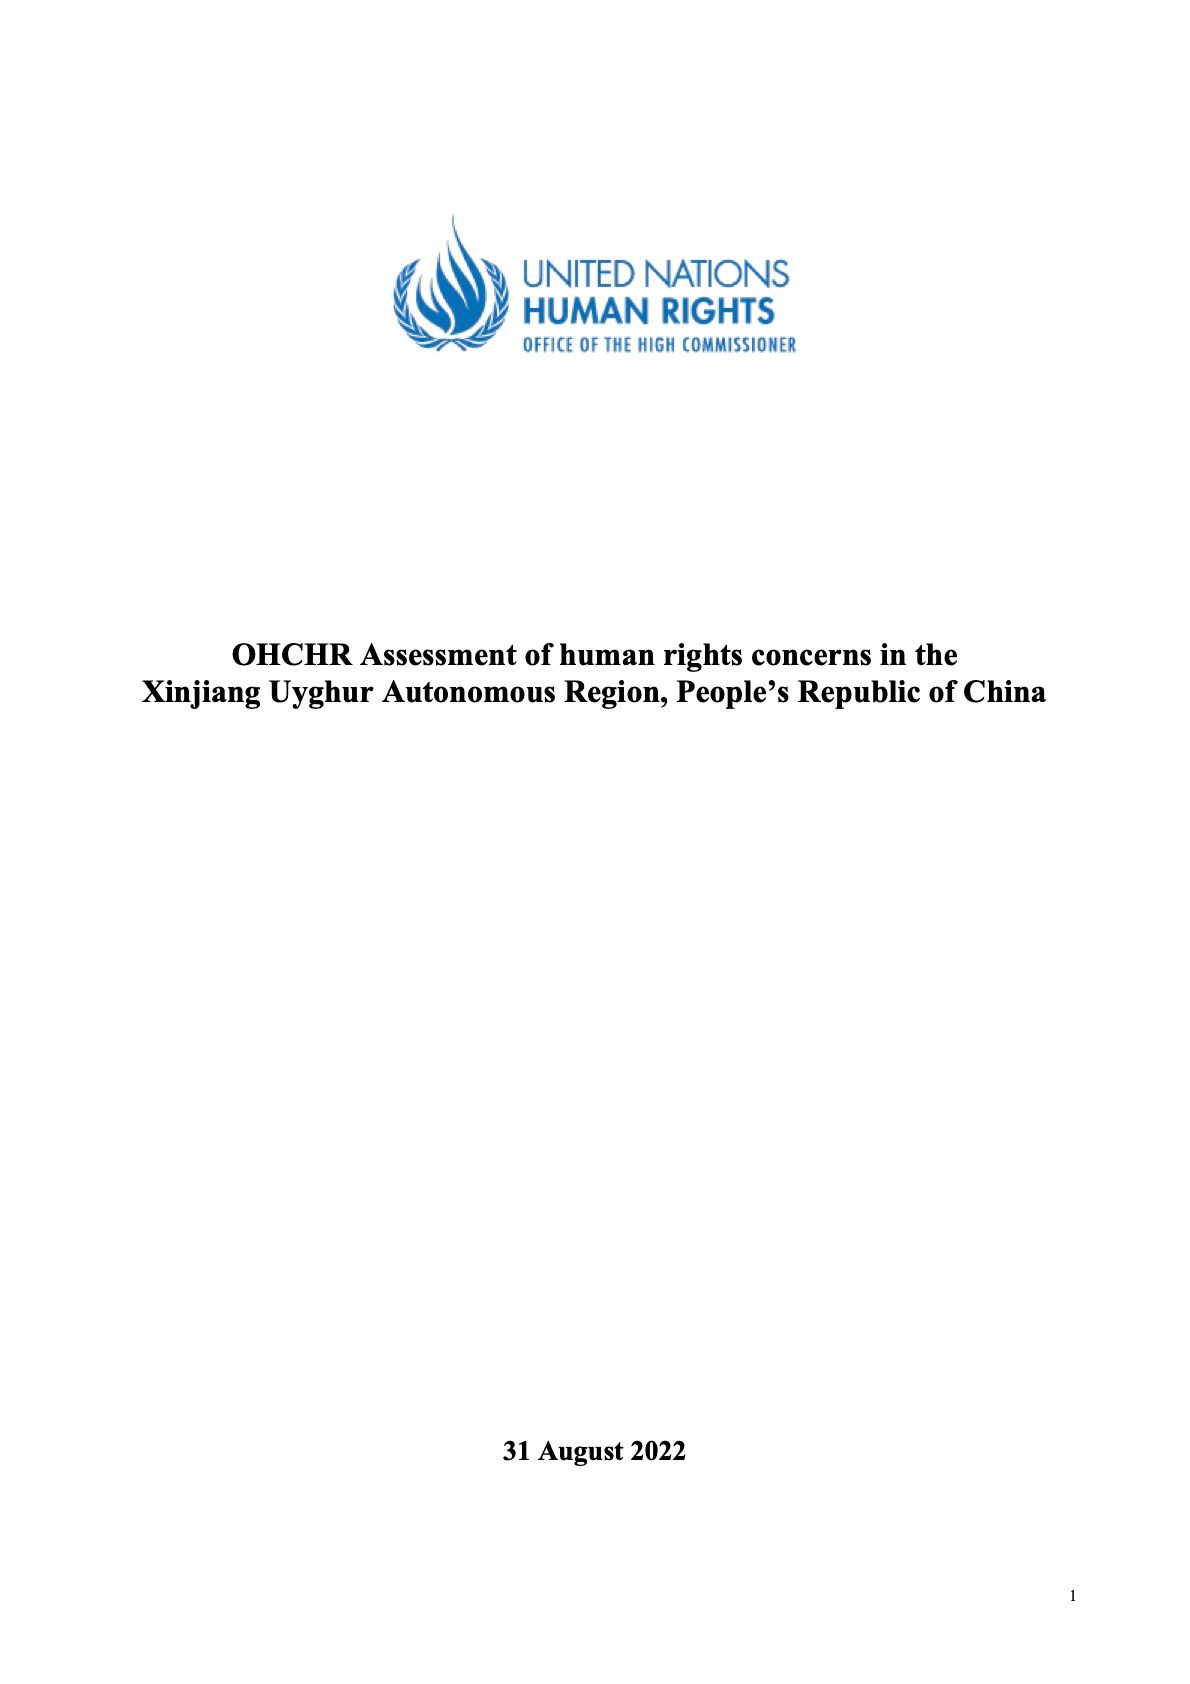 OHCHR Assessment of Human Rights Concerns in the Xinjiang Uyghur Autonomous Region, People’s Republic of China